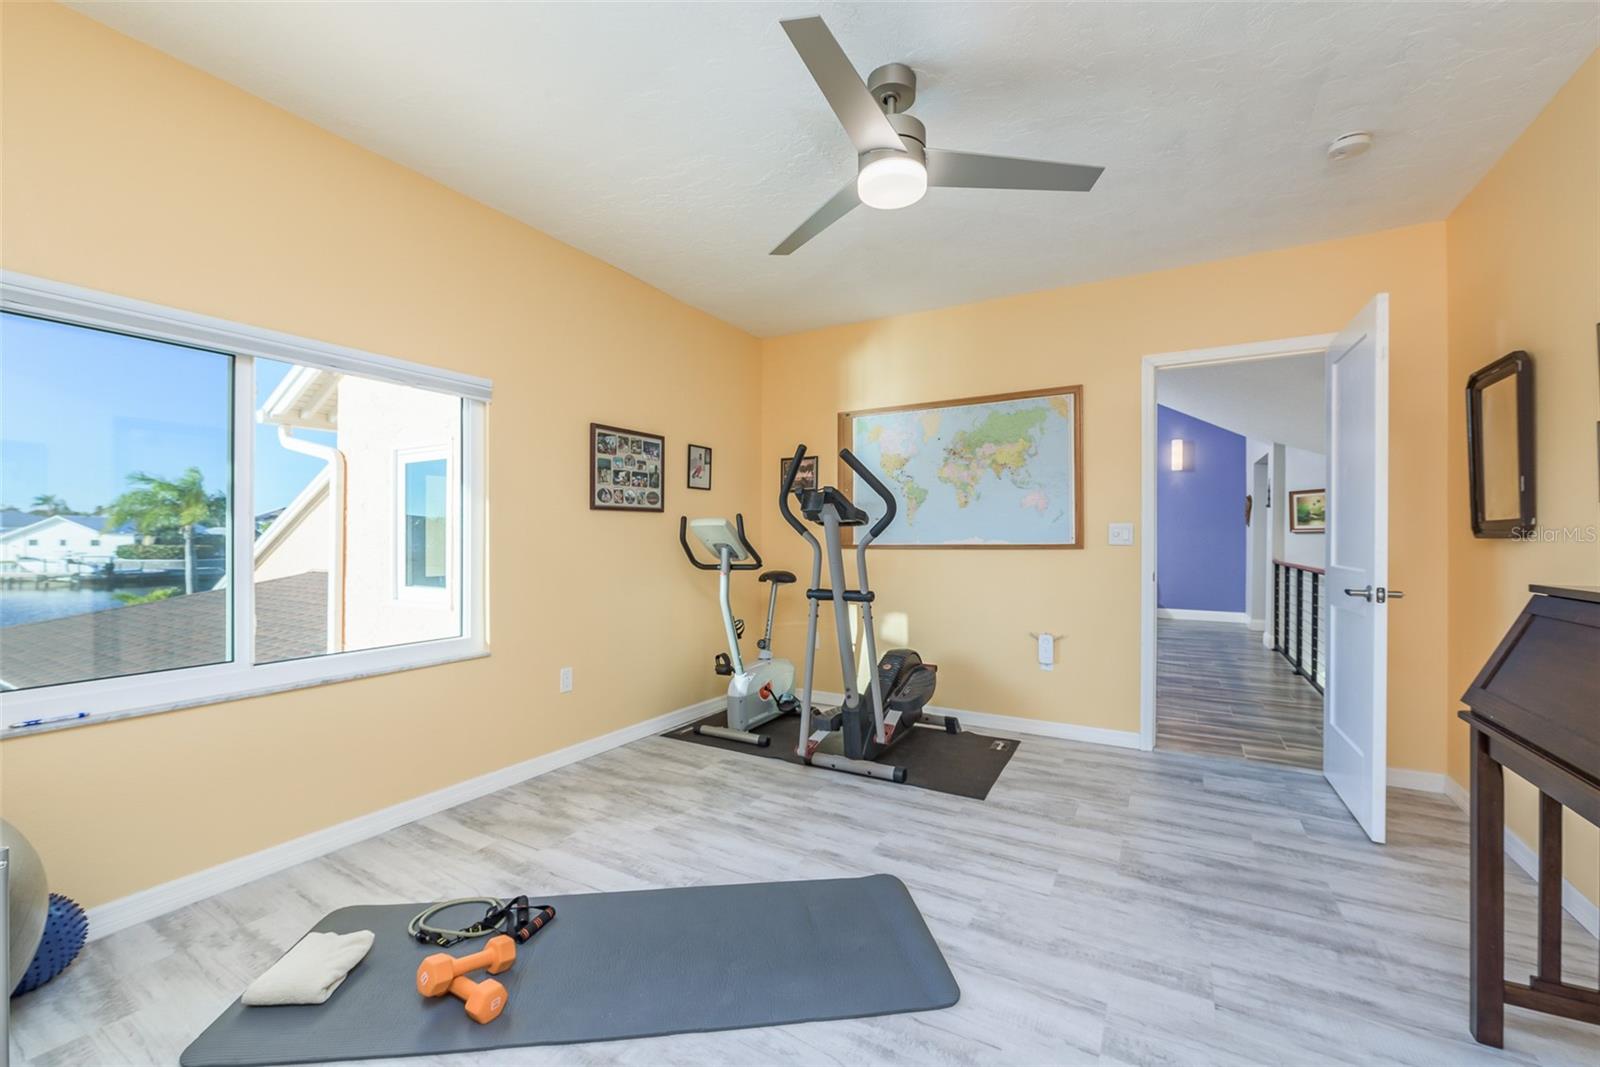 2nd Story Guest Bedroom 2/makes perfect home gym!